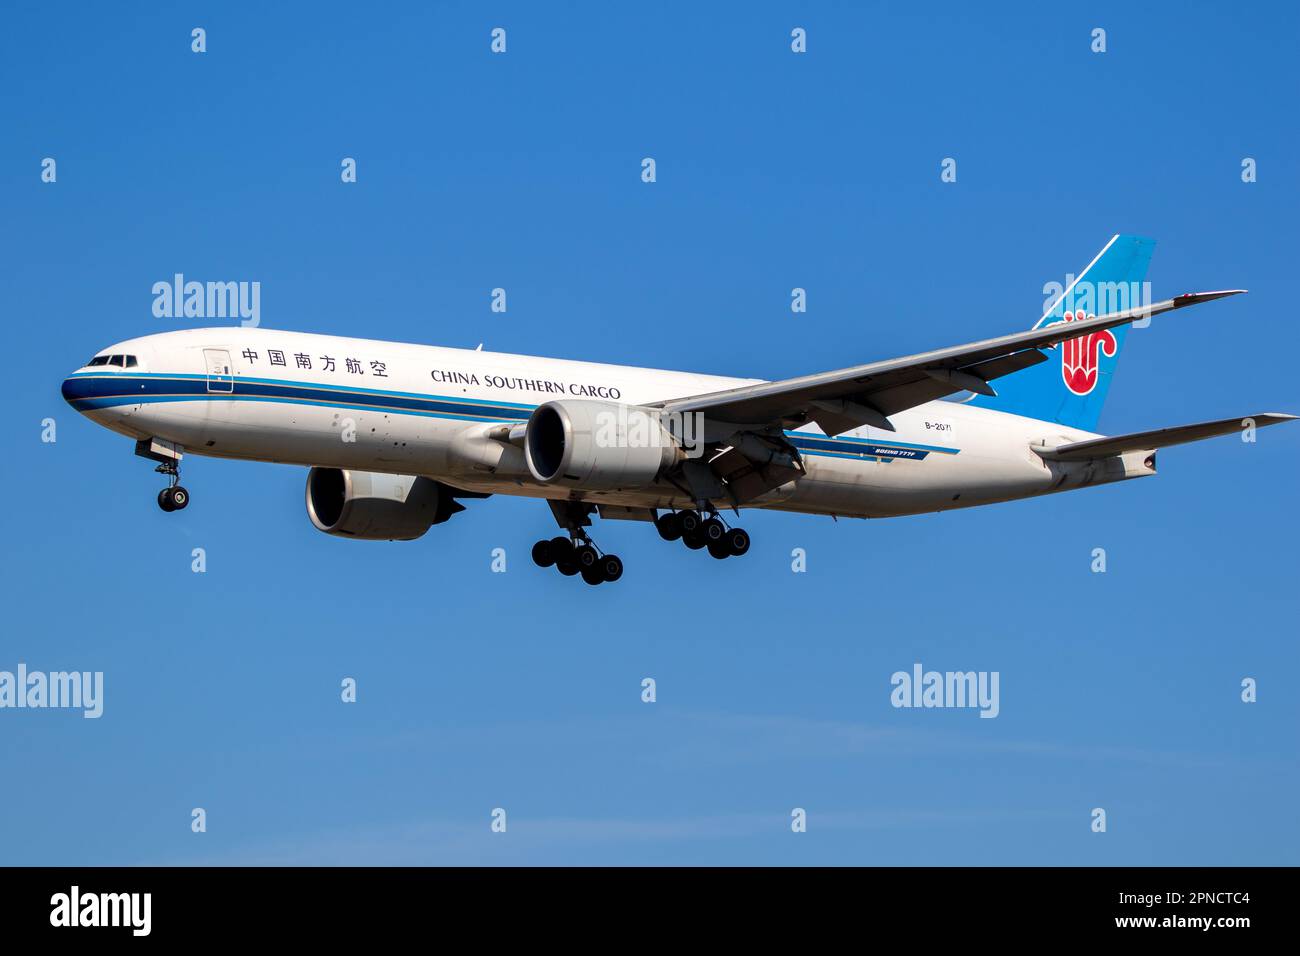 China Southern Airlines Cargo Boeing 777 transport plane arriving at Frankfurt Airport, Germany - September 11, 2019 Stock Photo